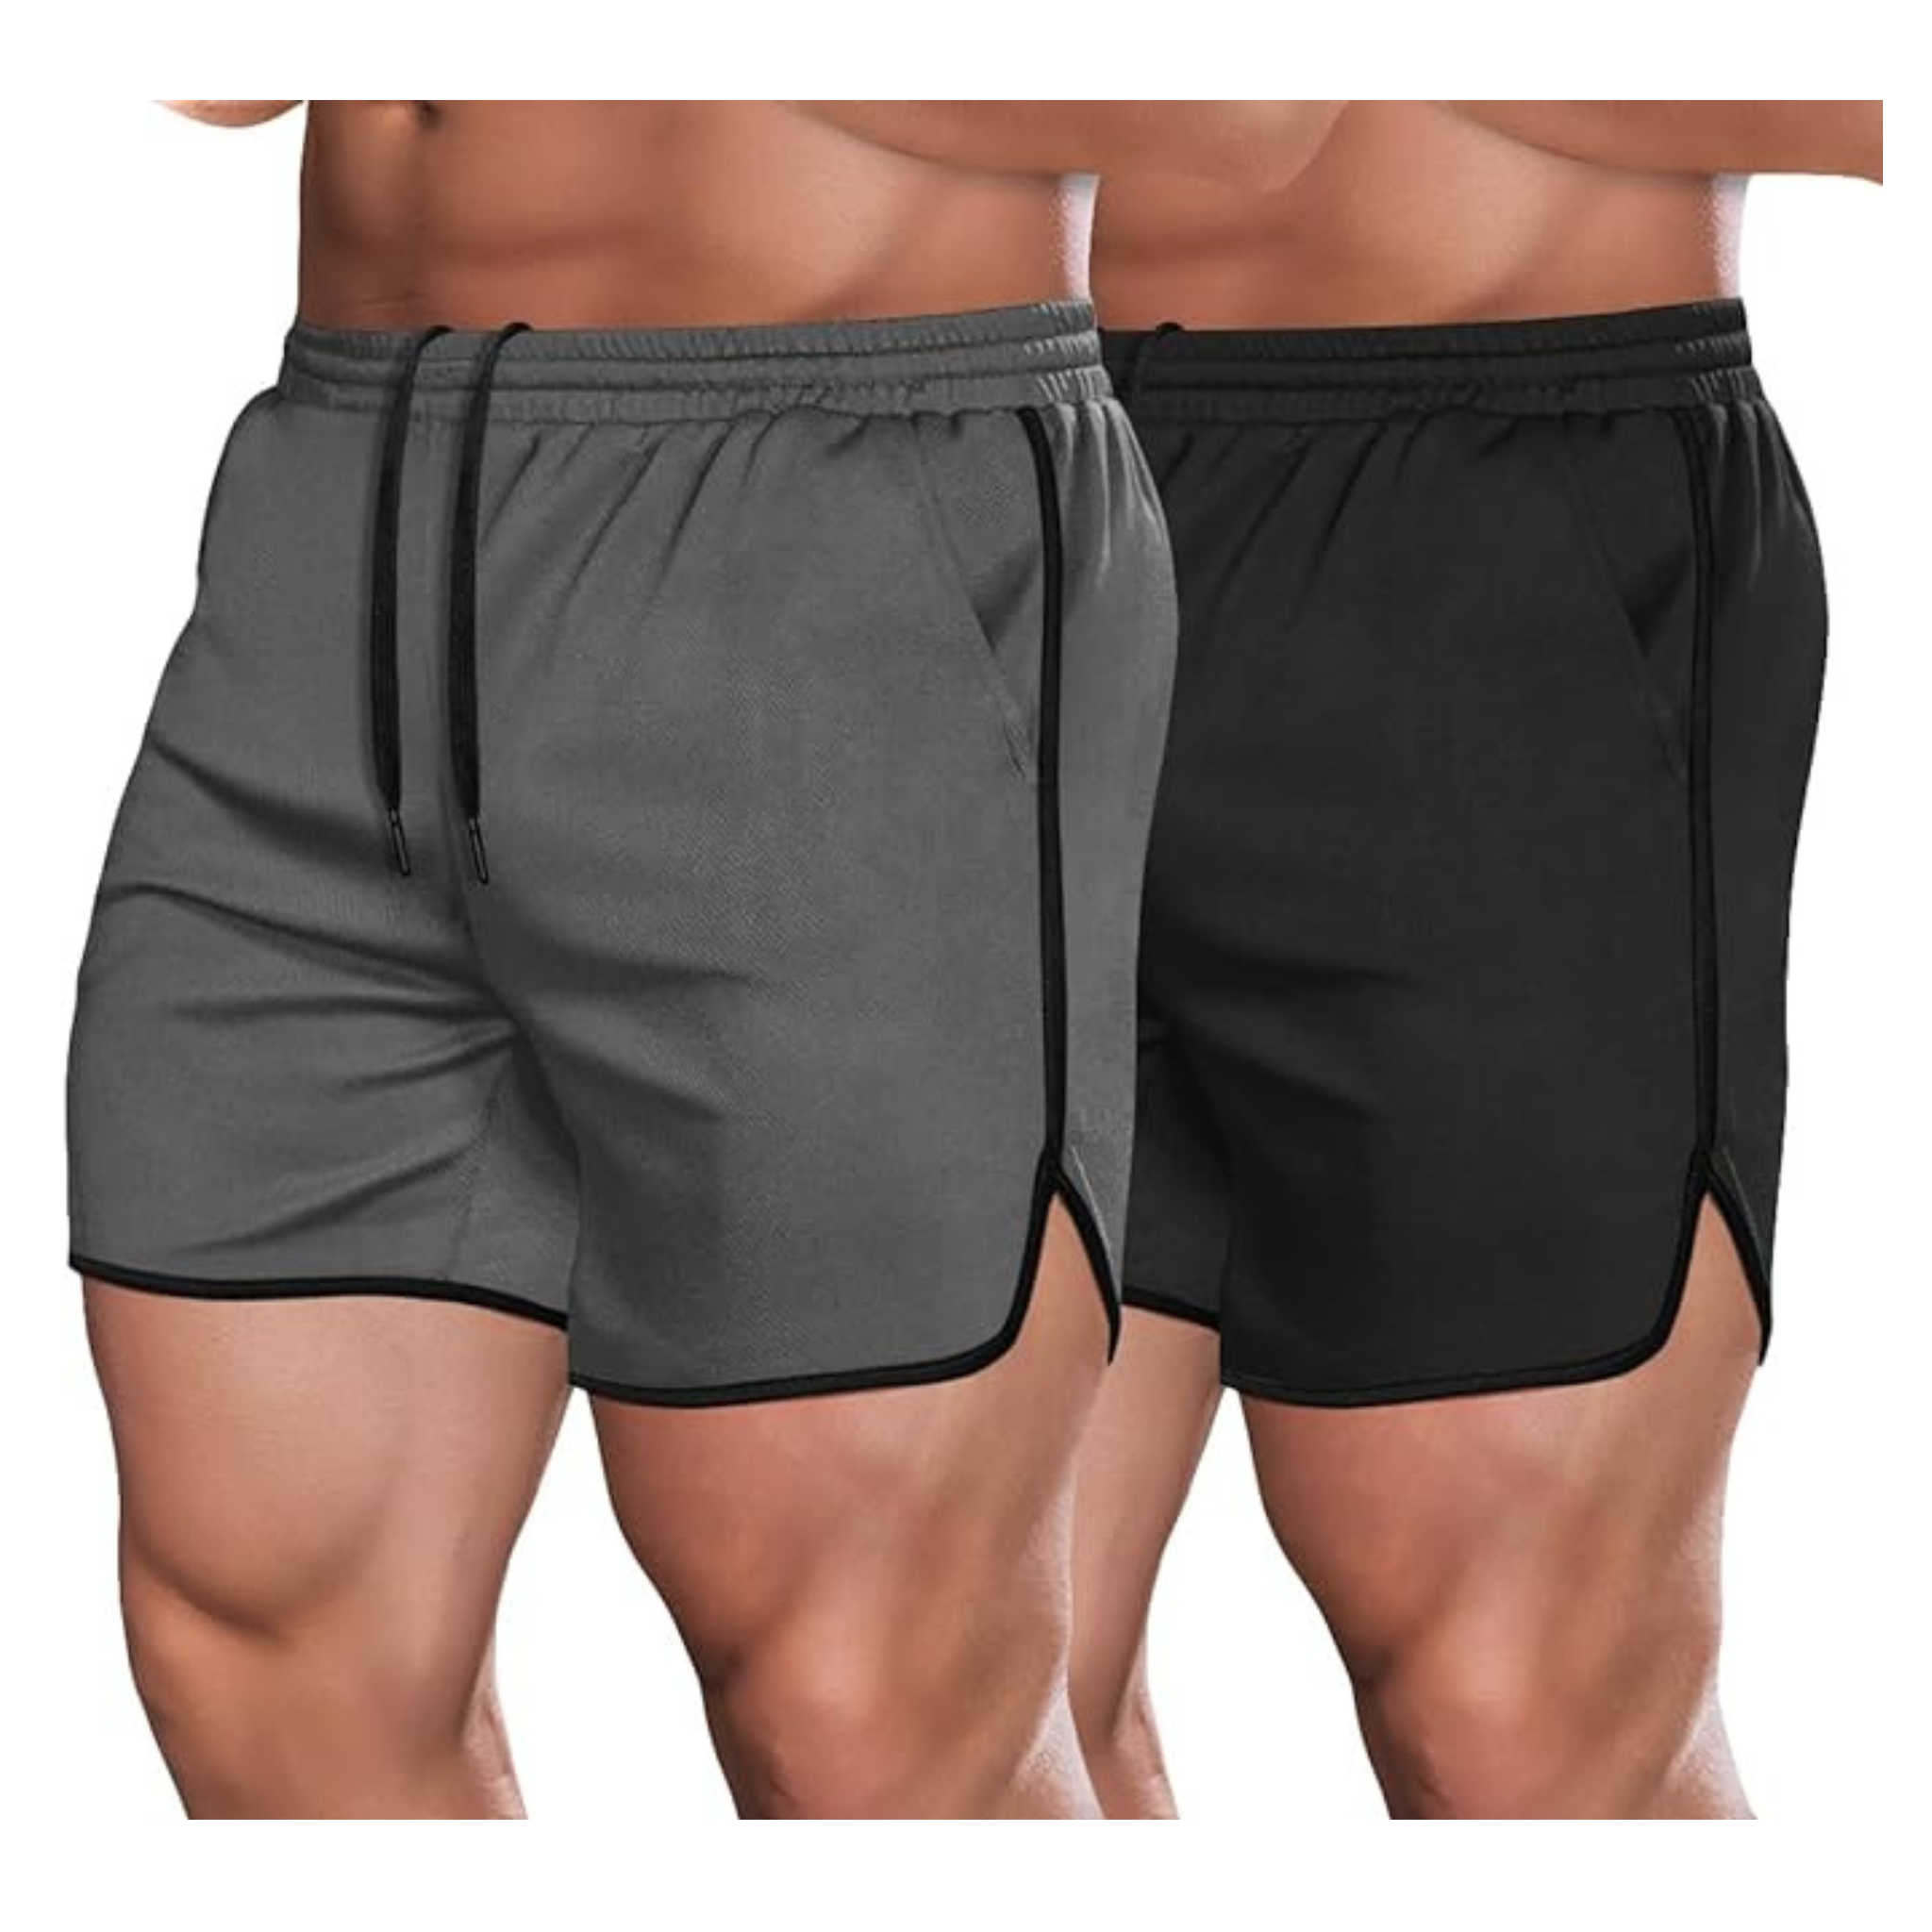 2-Pack COOFANDY Men's Gym Workout Shorts with Pockets